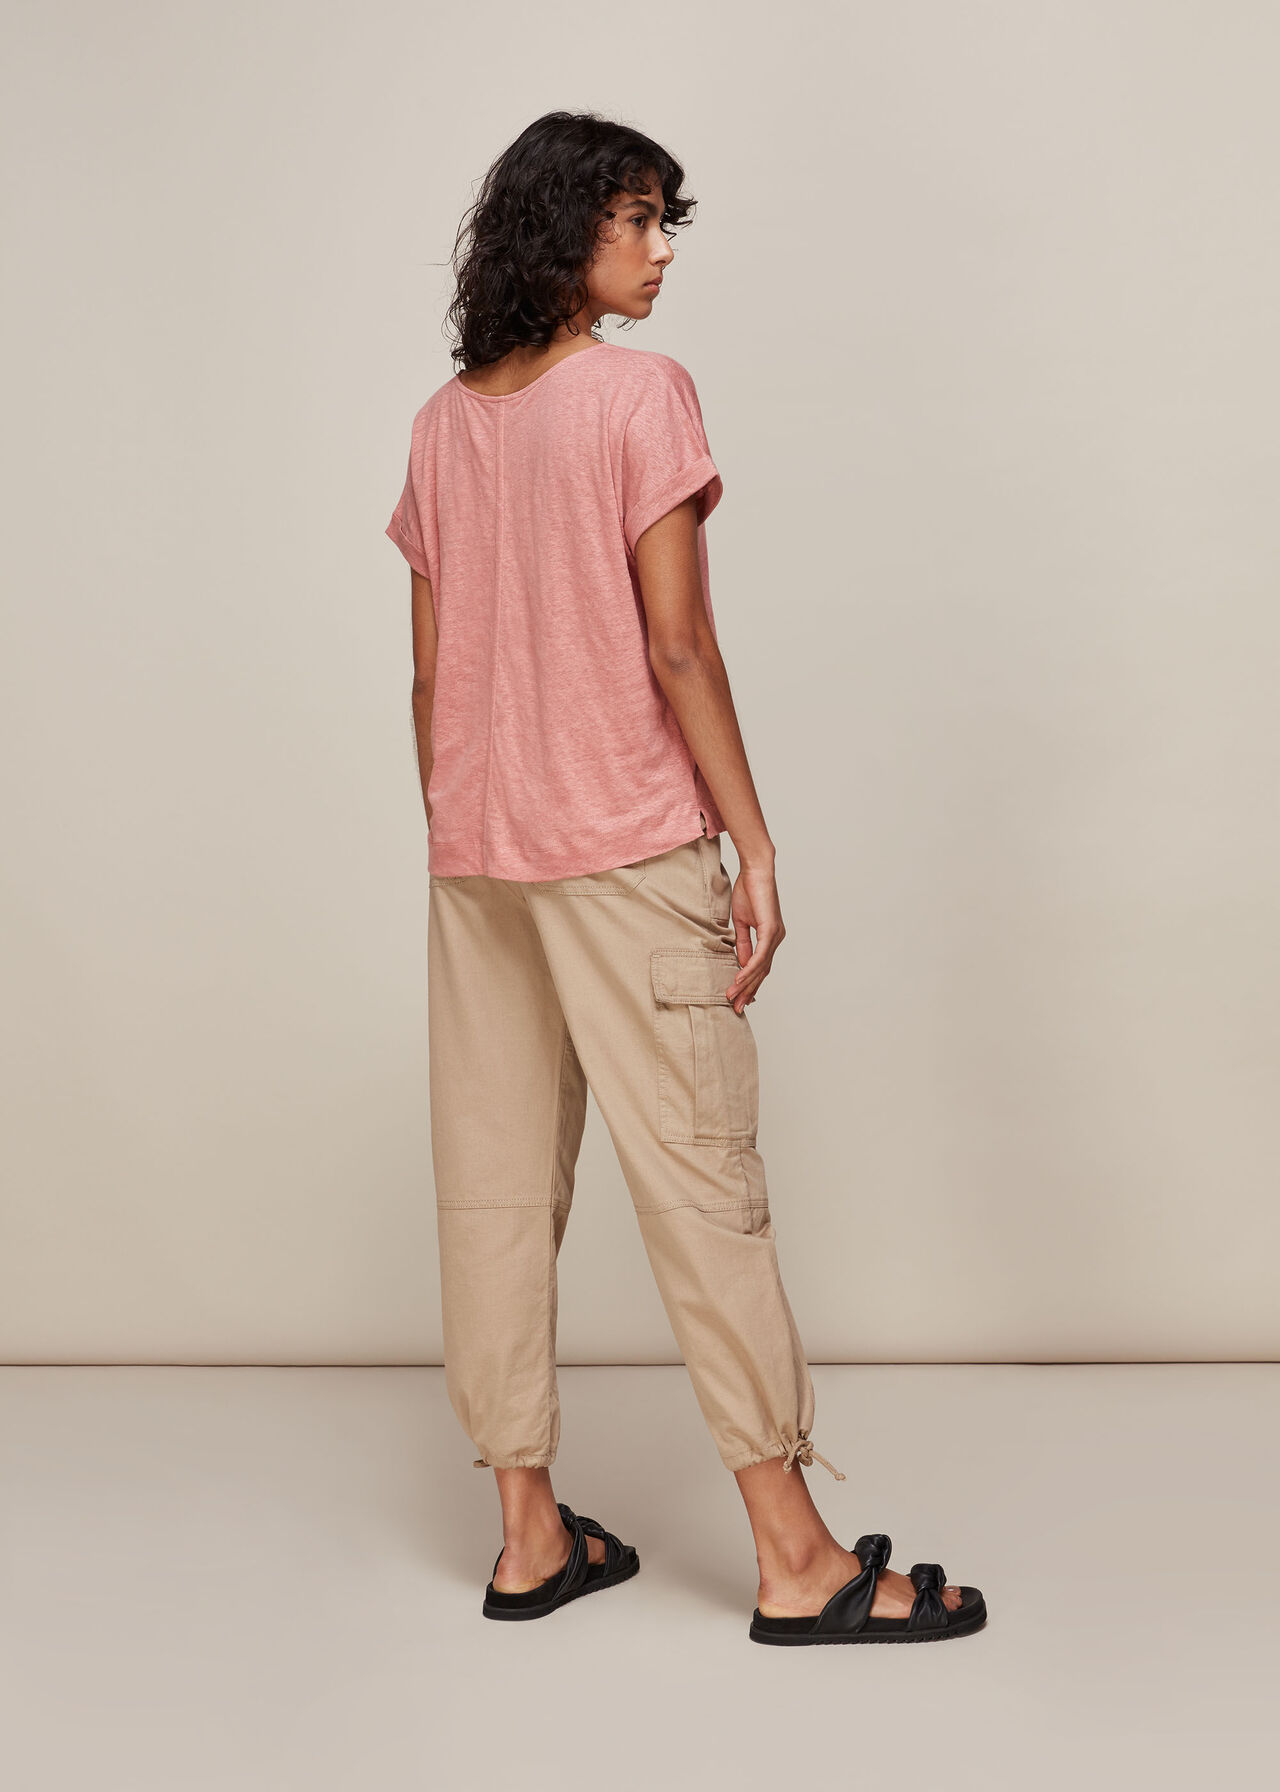 Relaxed Linen Tshirt Pale Pink